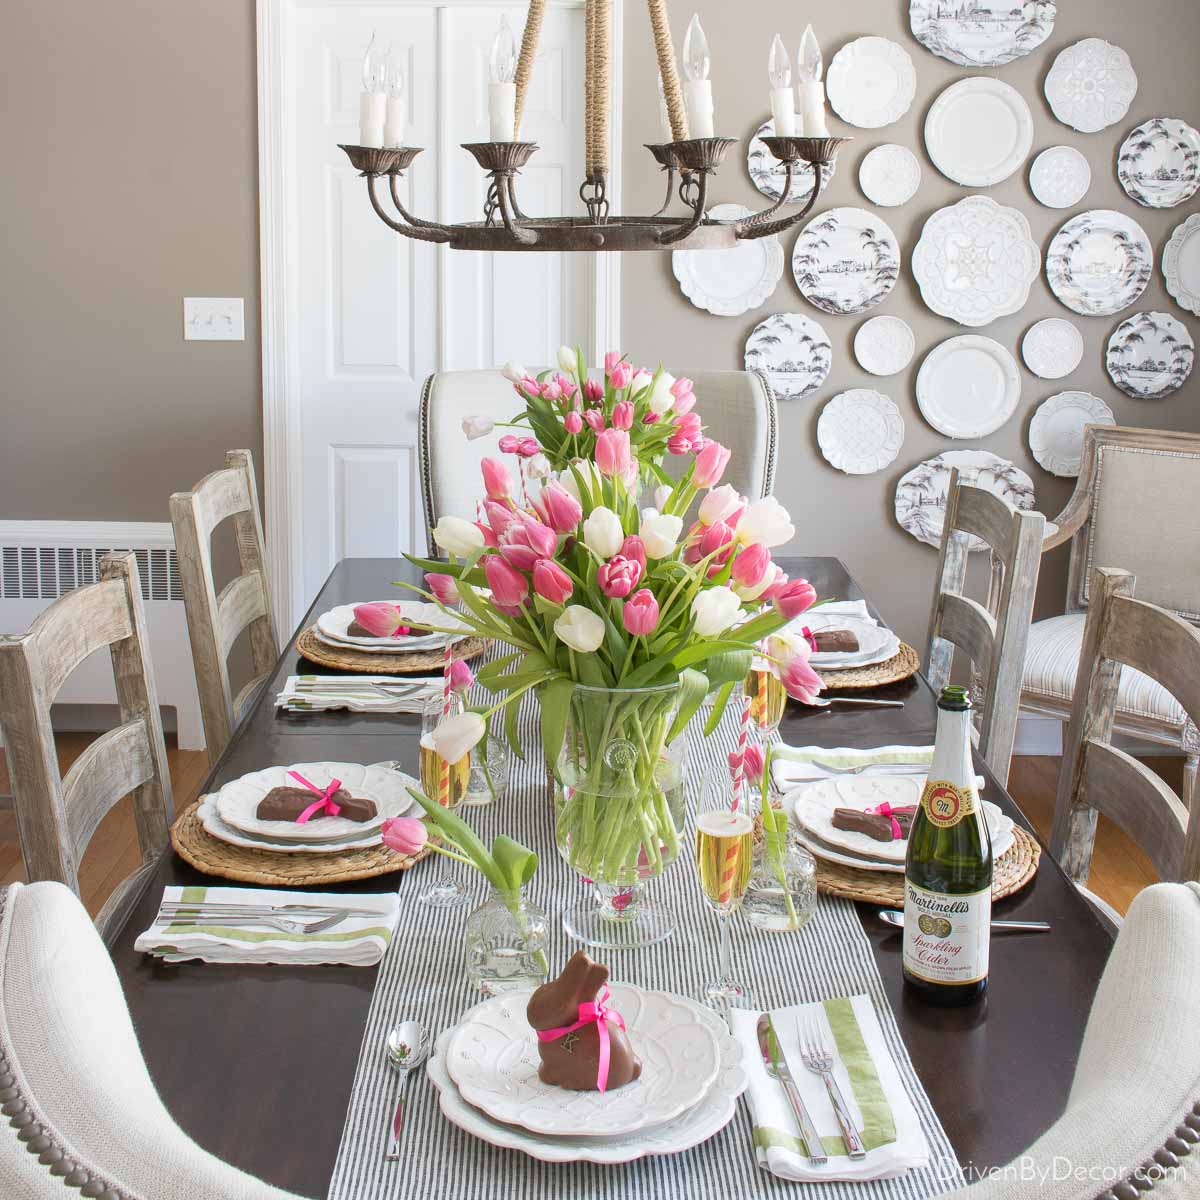 50 Dining Room Decor Ideas For a Stylish Entertaining Space